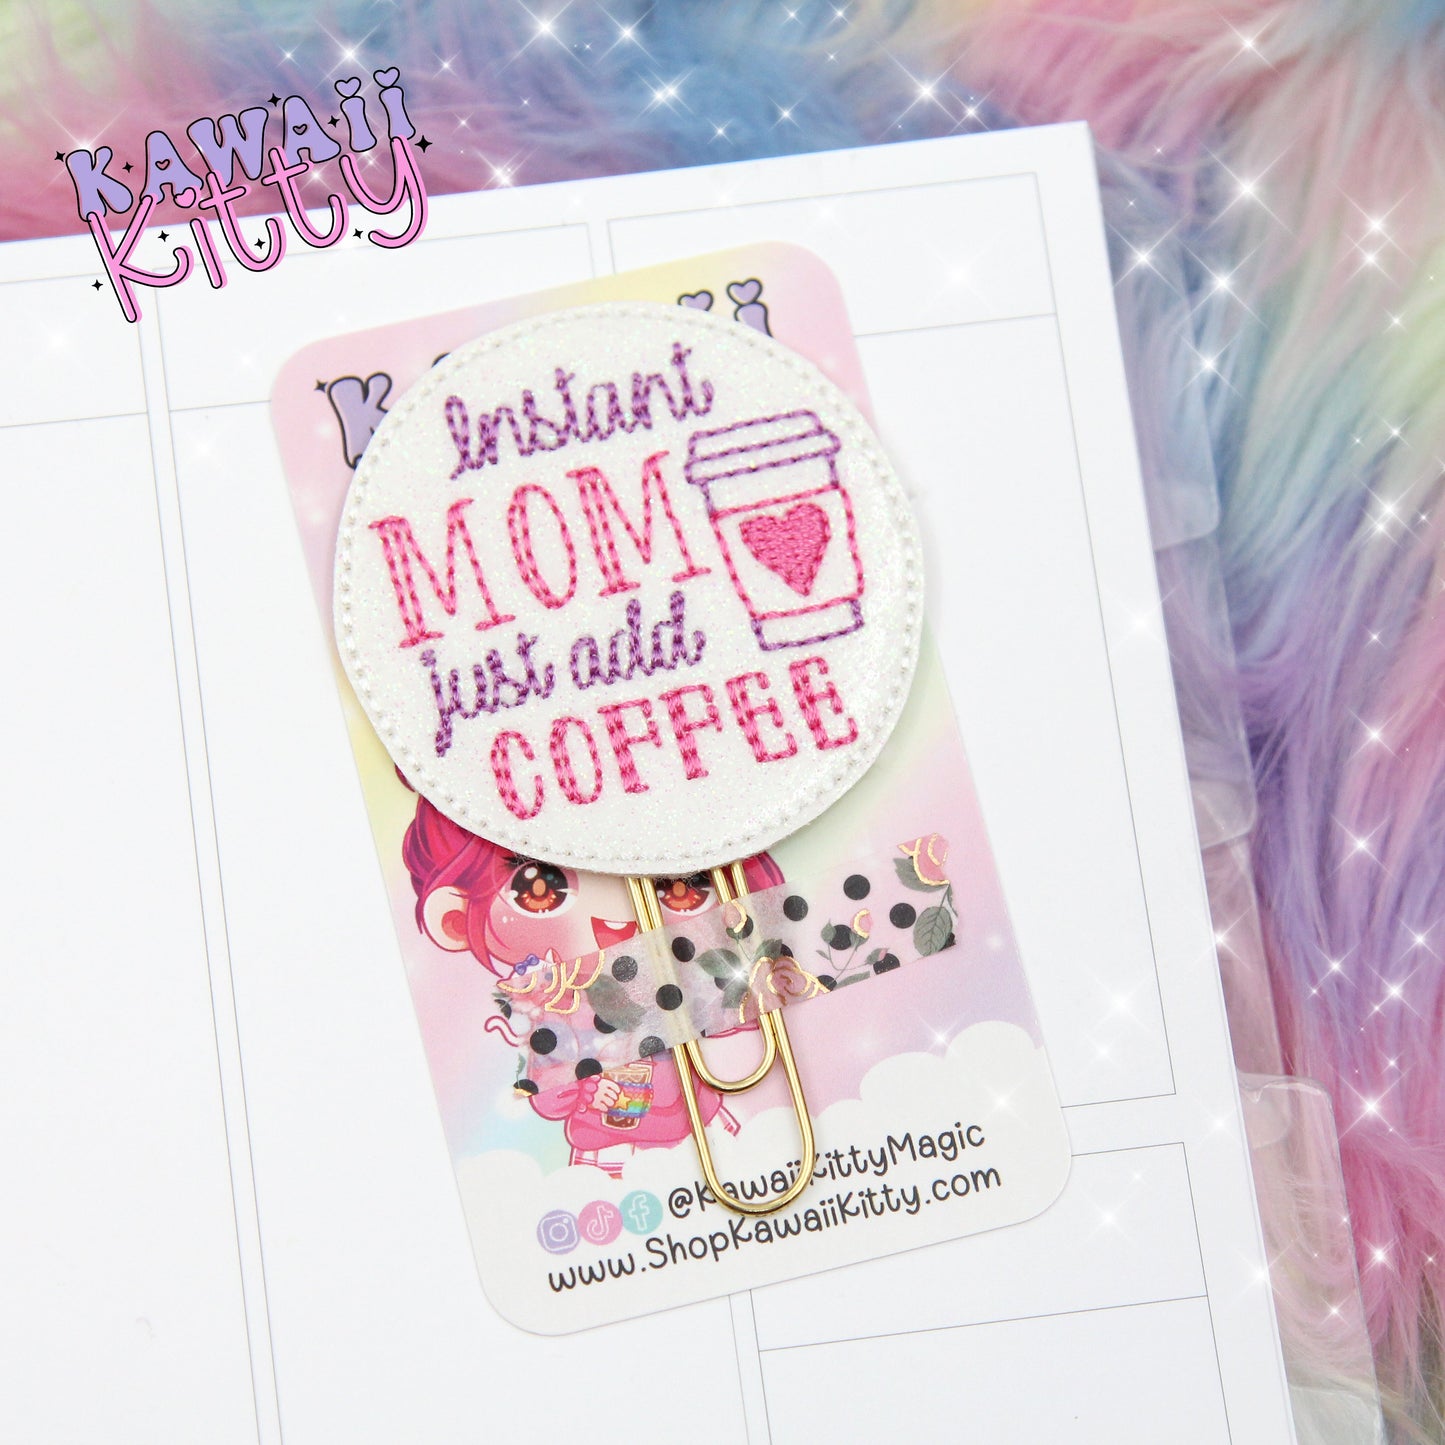 Instant Mom Just Add Coffee Planner Clip